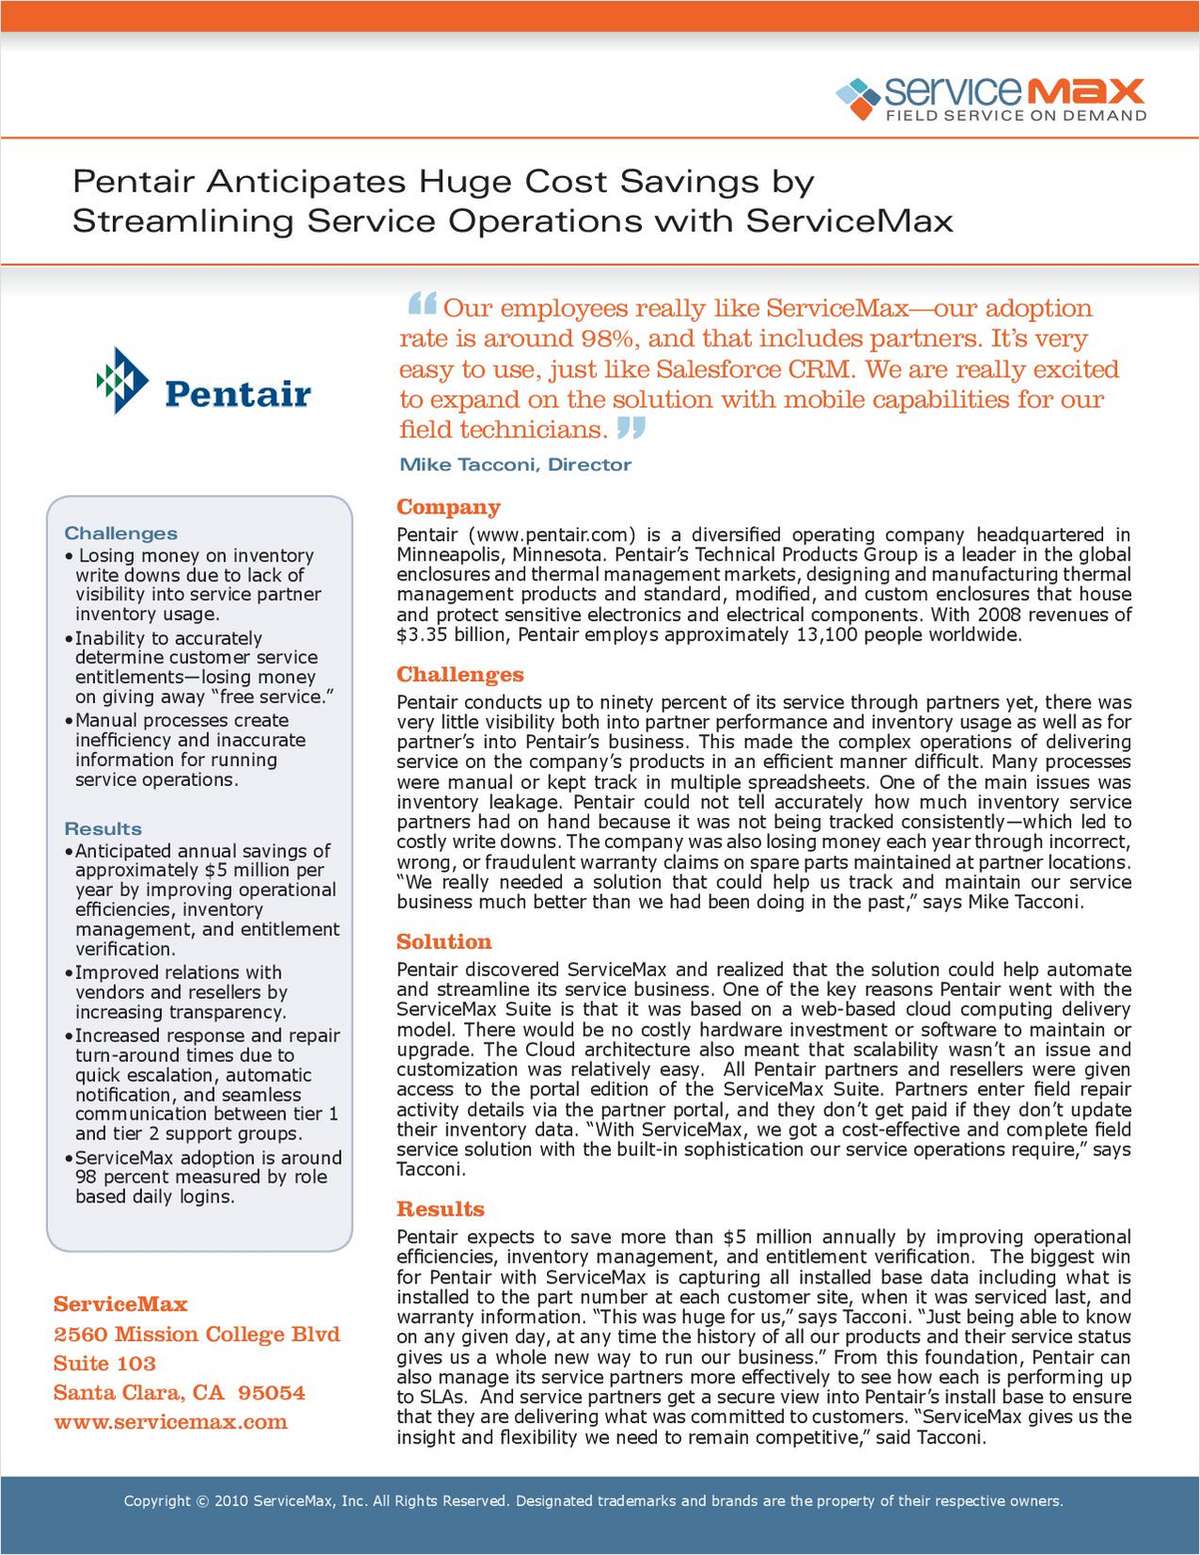 Pentair Improves Service Operations with a New On-Demand Solution